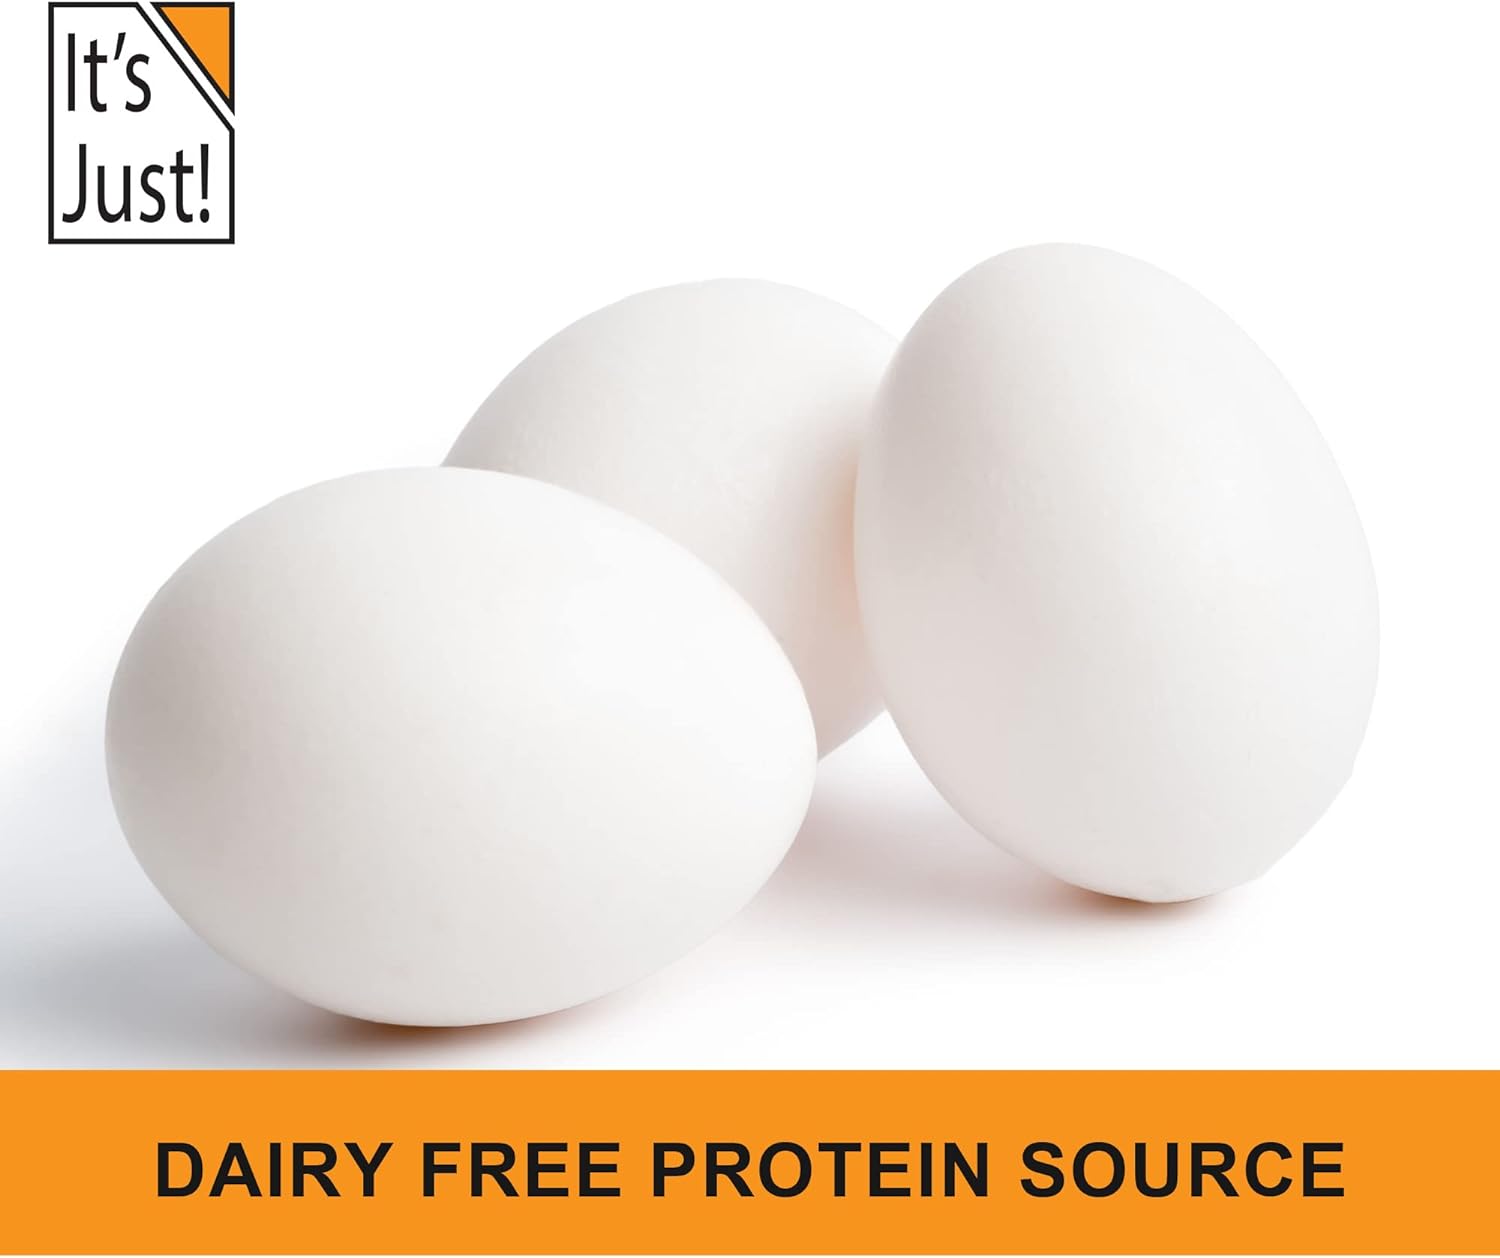 It's Just! - Egg White Protein Powder, Made in USA from Cage-Free Eggs